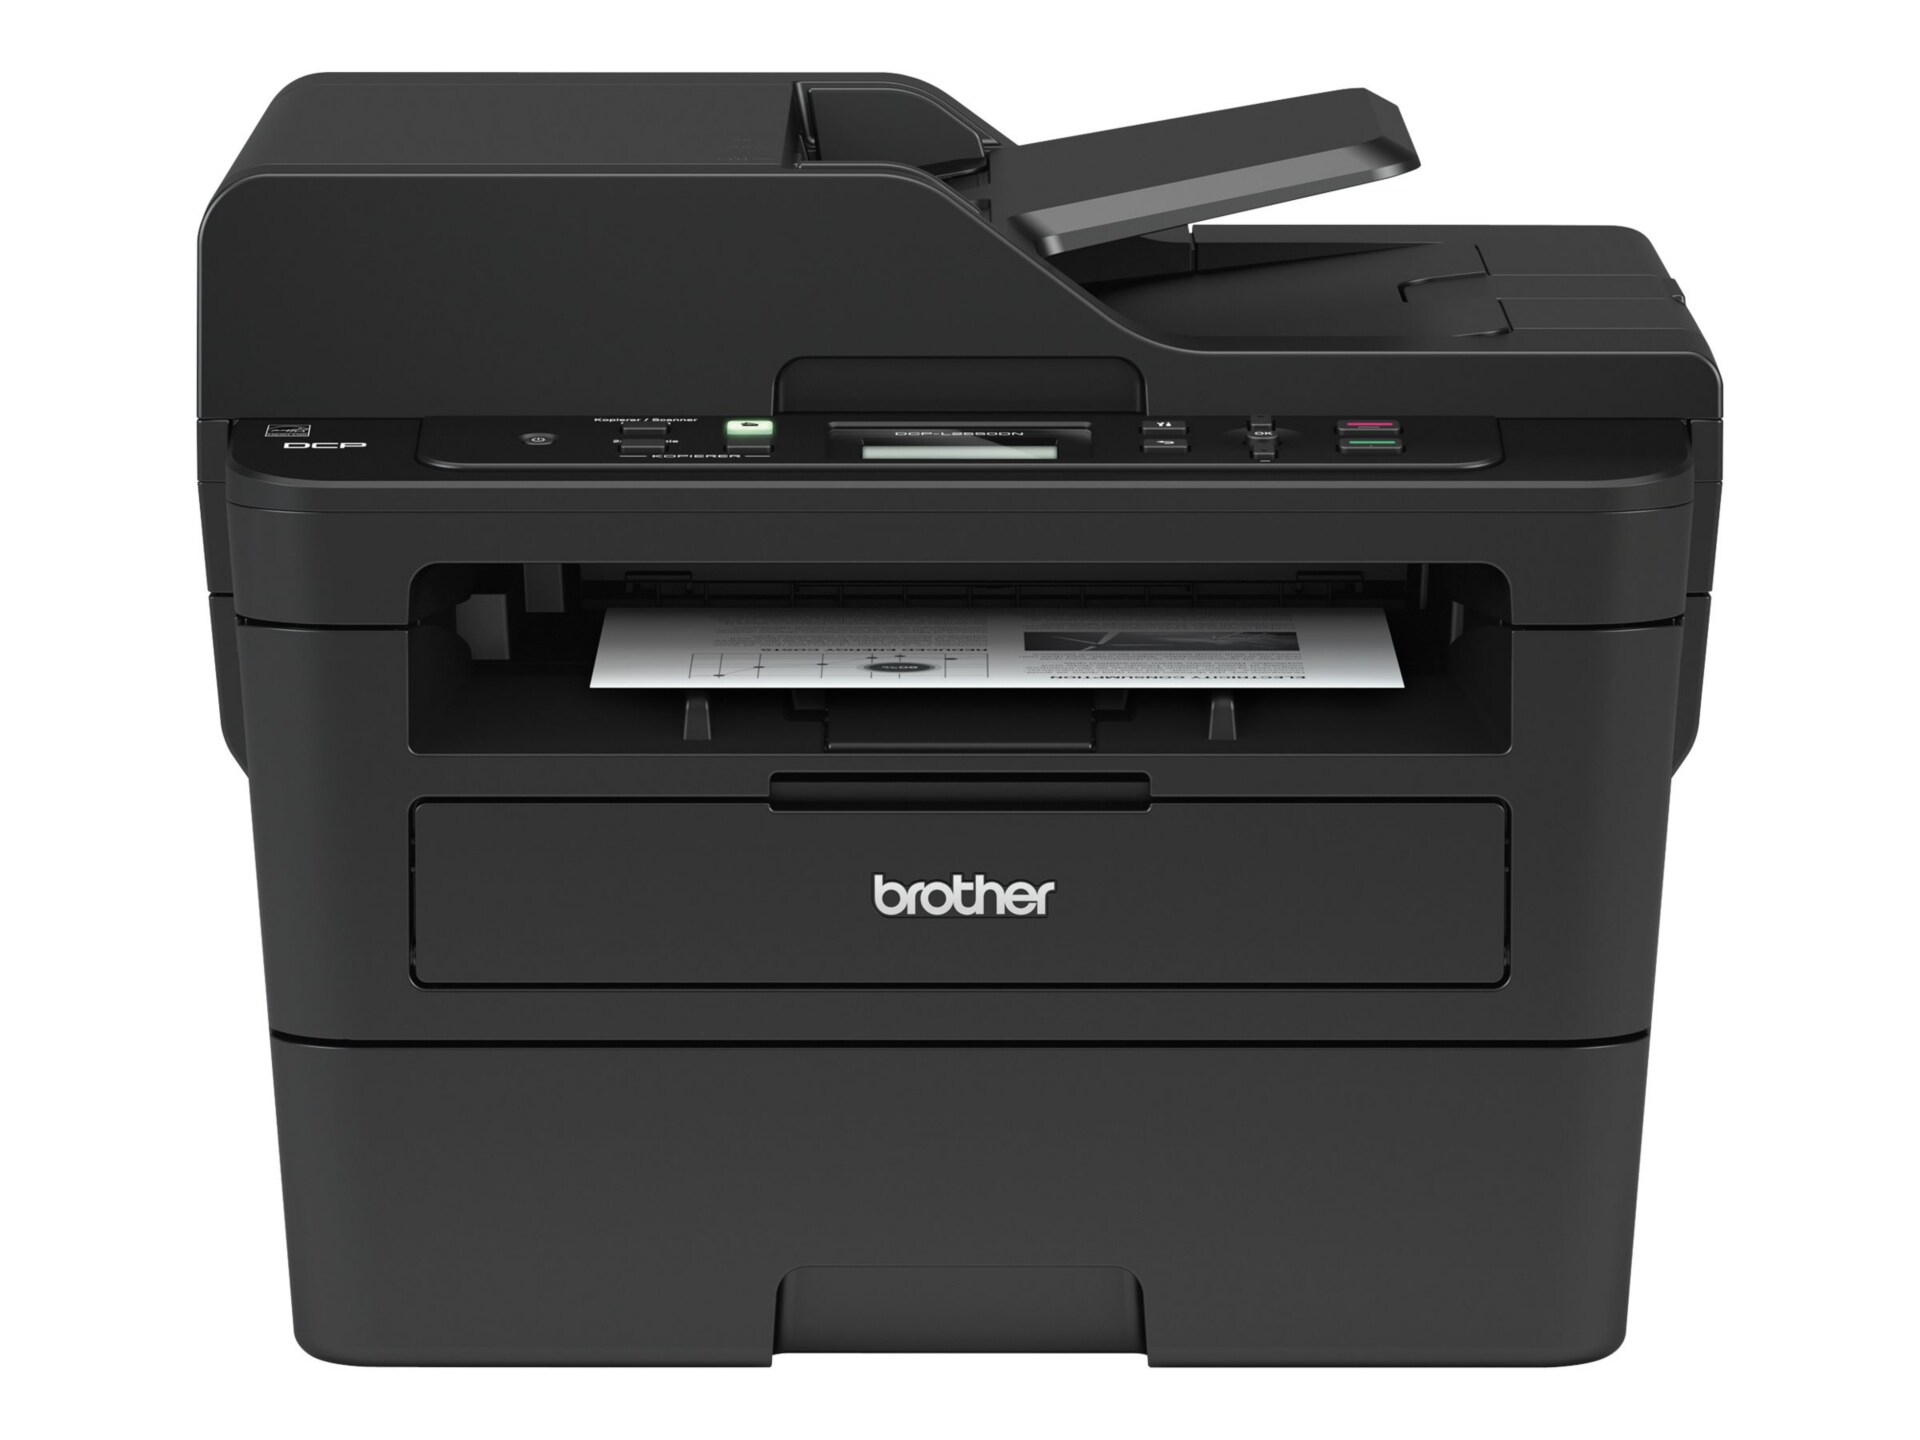 B/W　Brother　printer　DCP-L2550DW　multifunction　Printers　DCPL2550DW　All-in-One